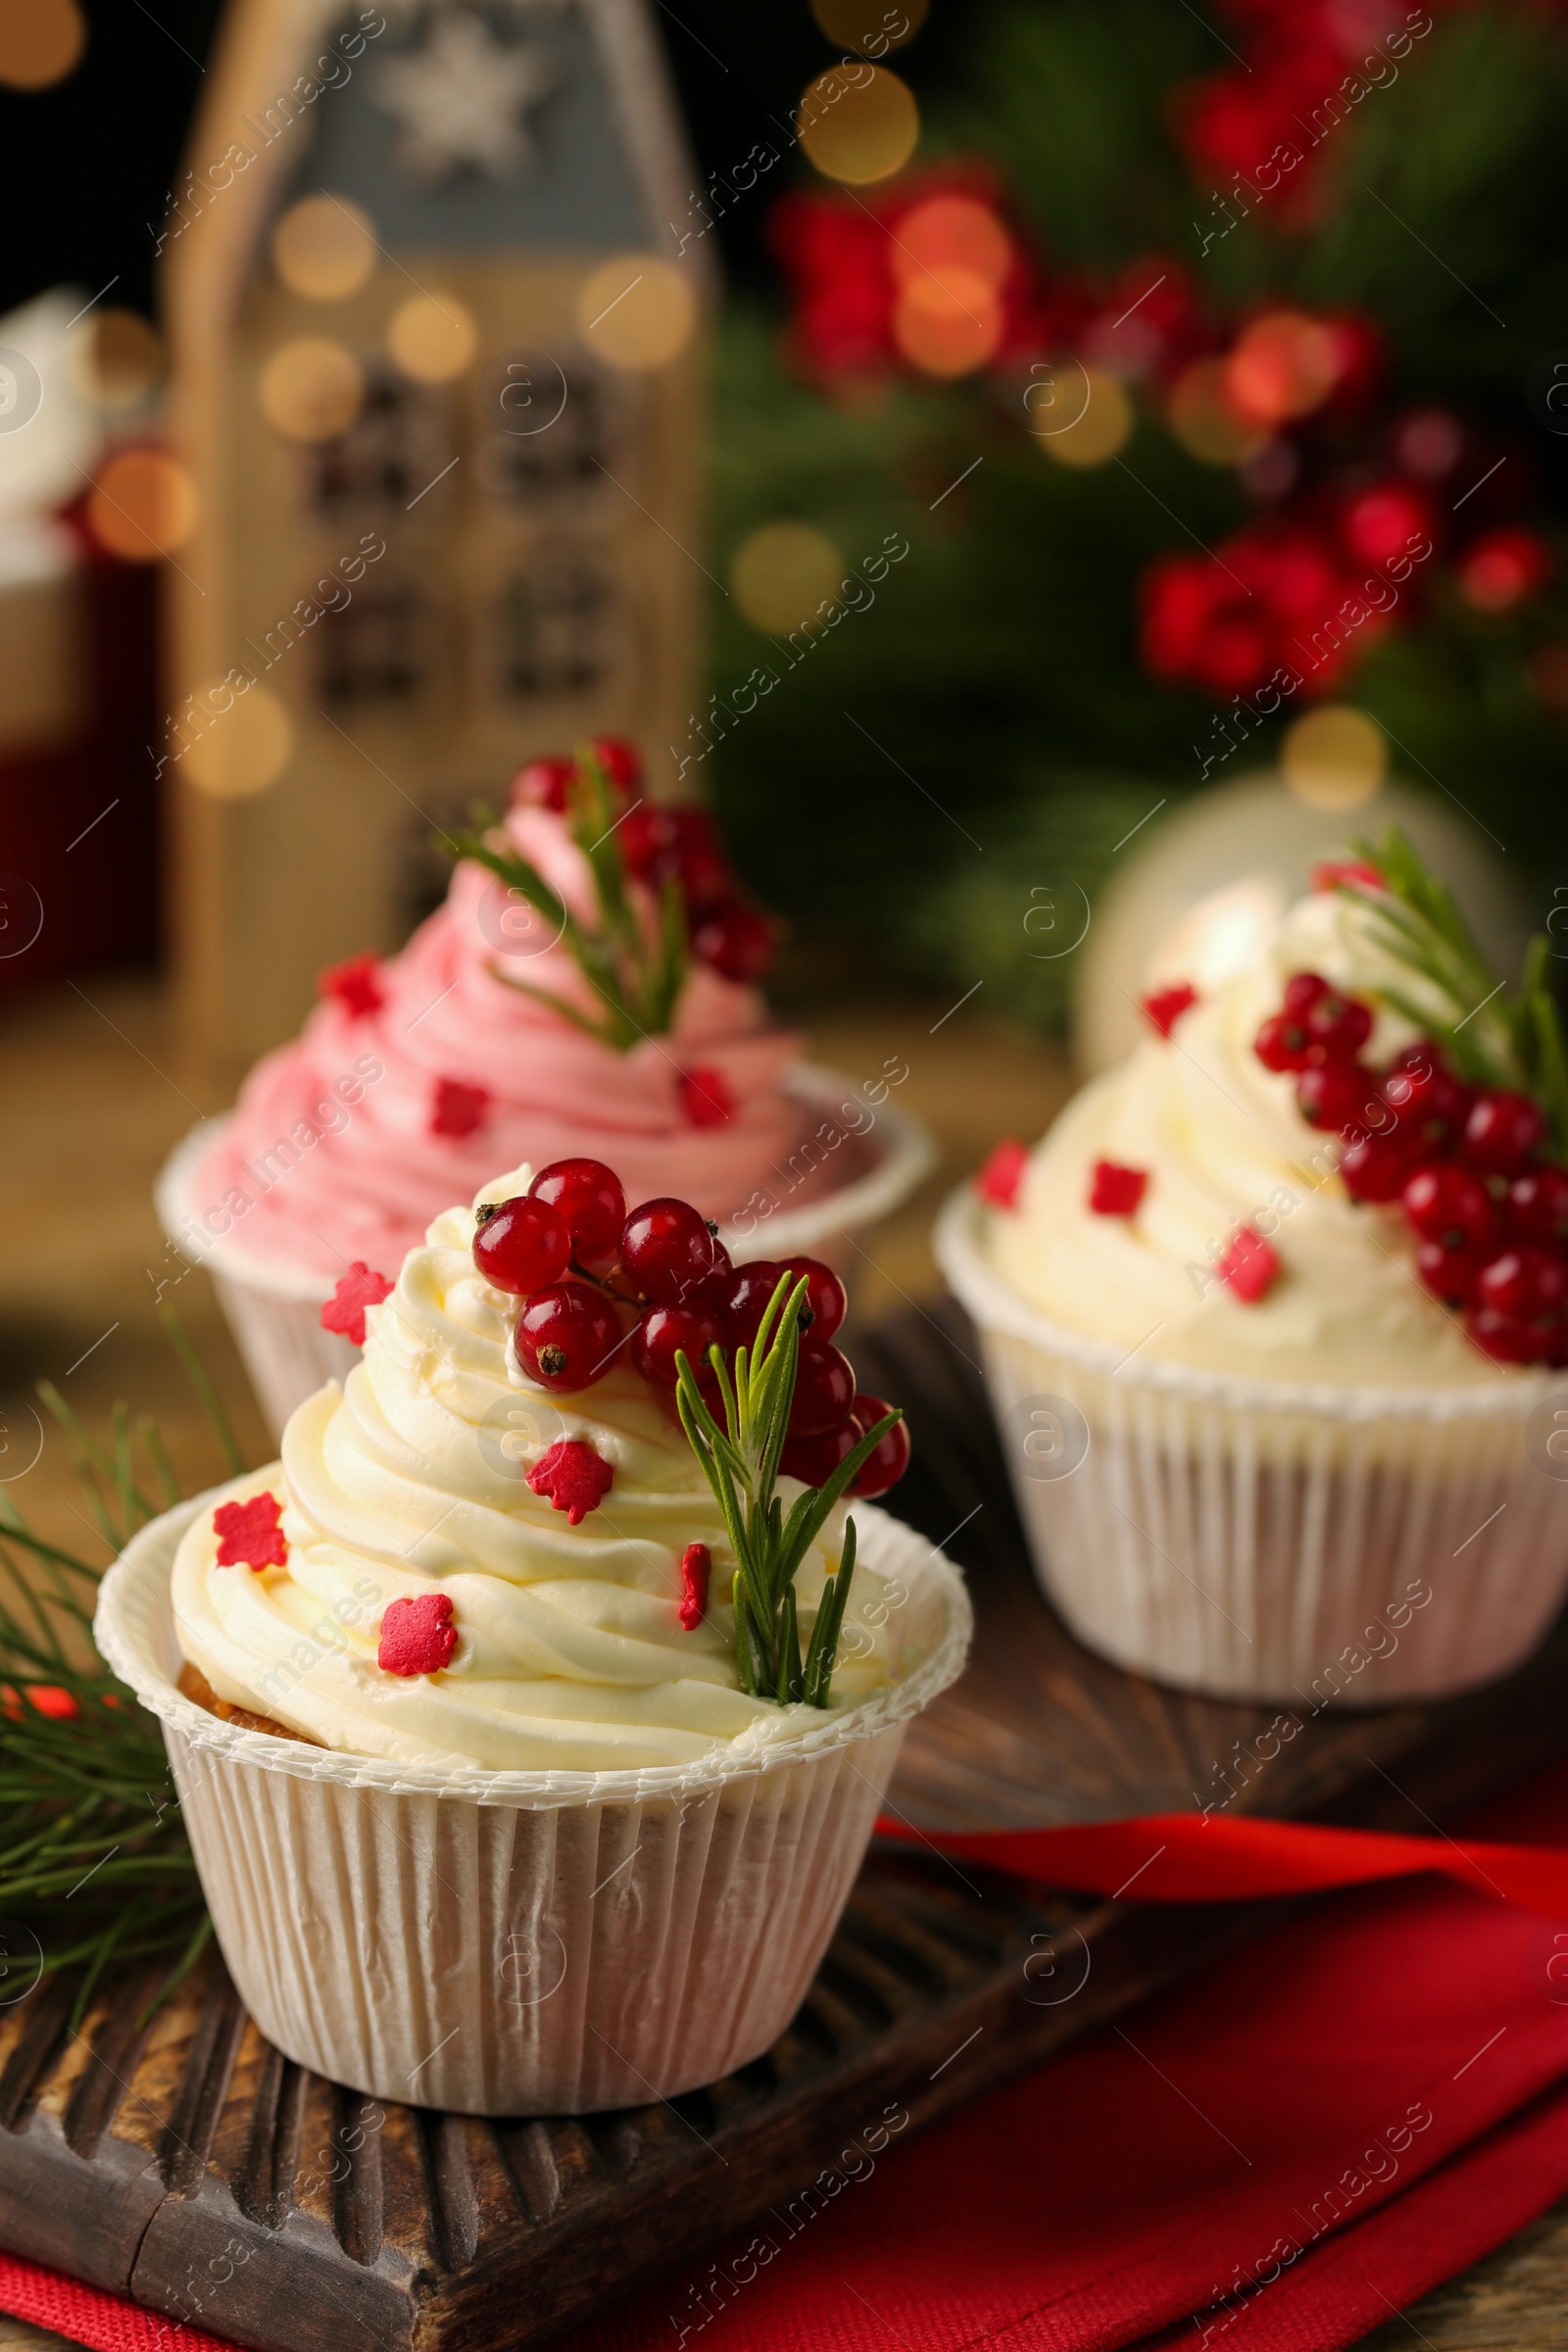 Photo of Delicious cupcakes and Christmas decorations on table